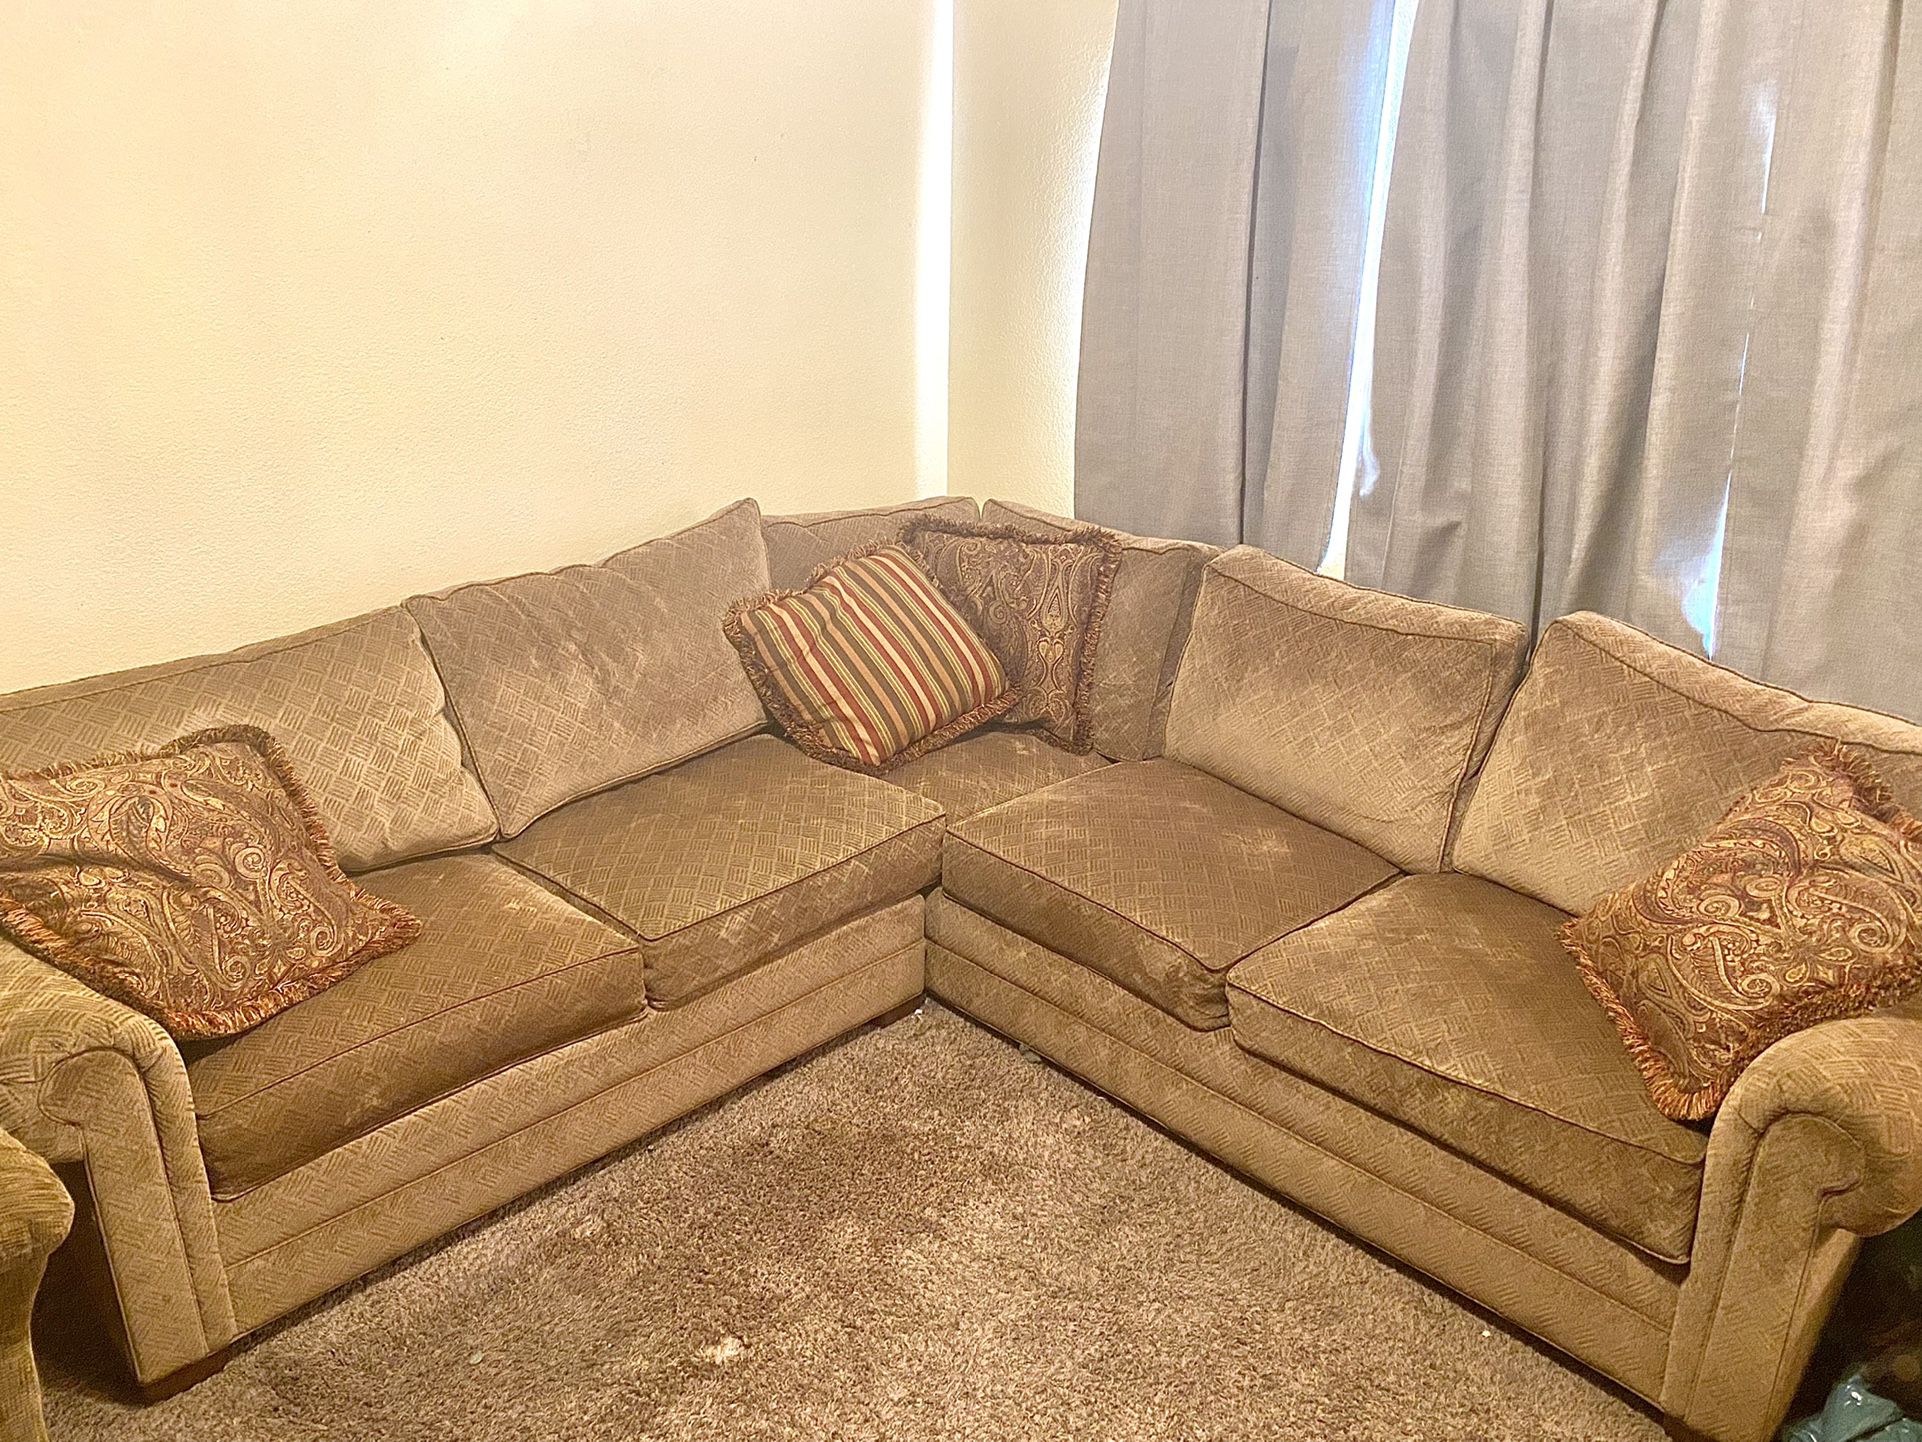 Custome Made SLATERS CENTURY 2pc Sectional